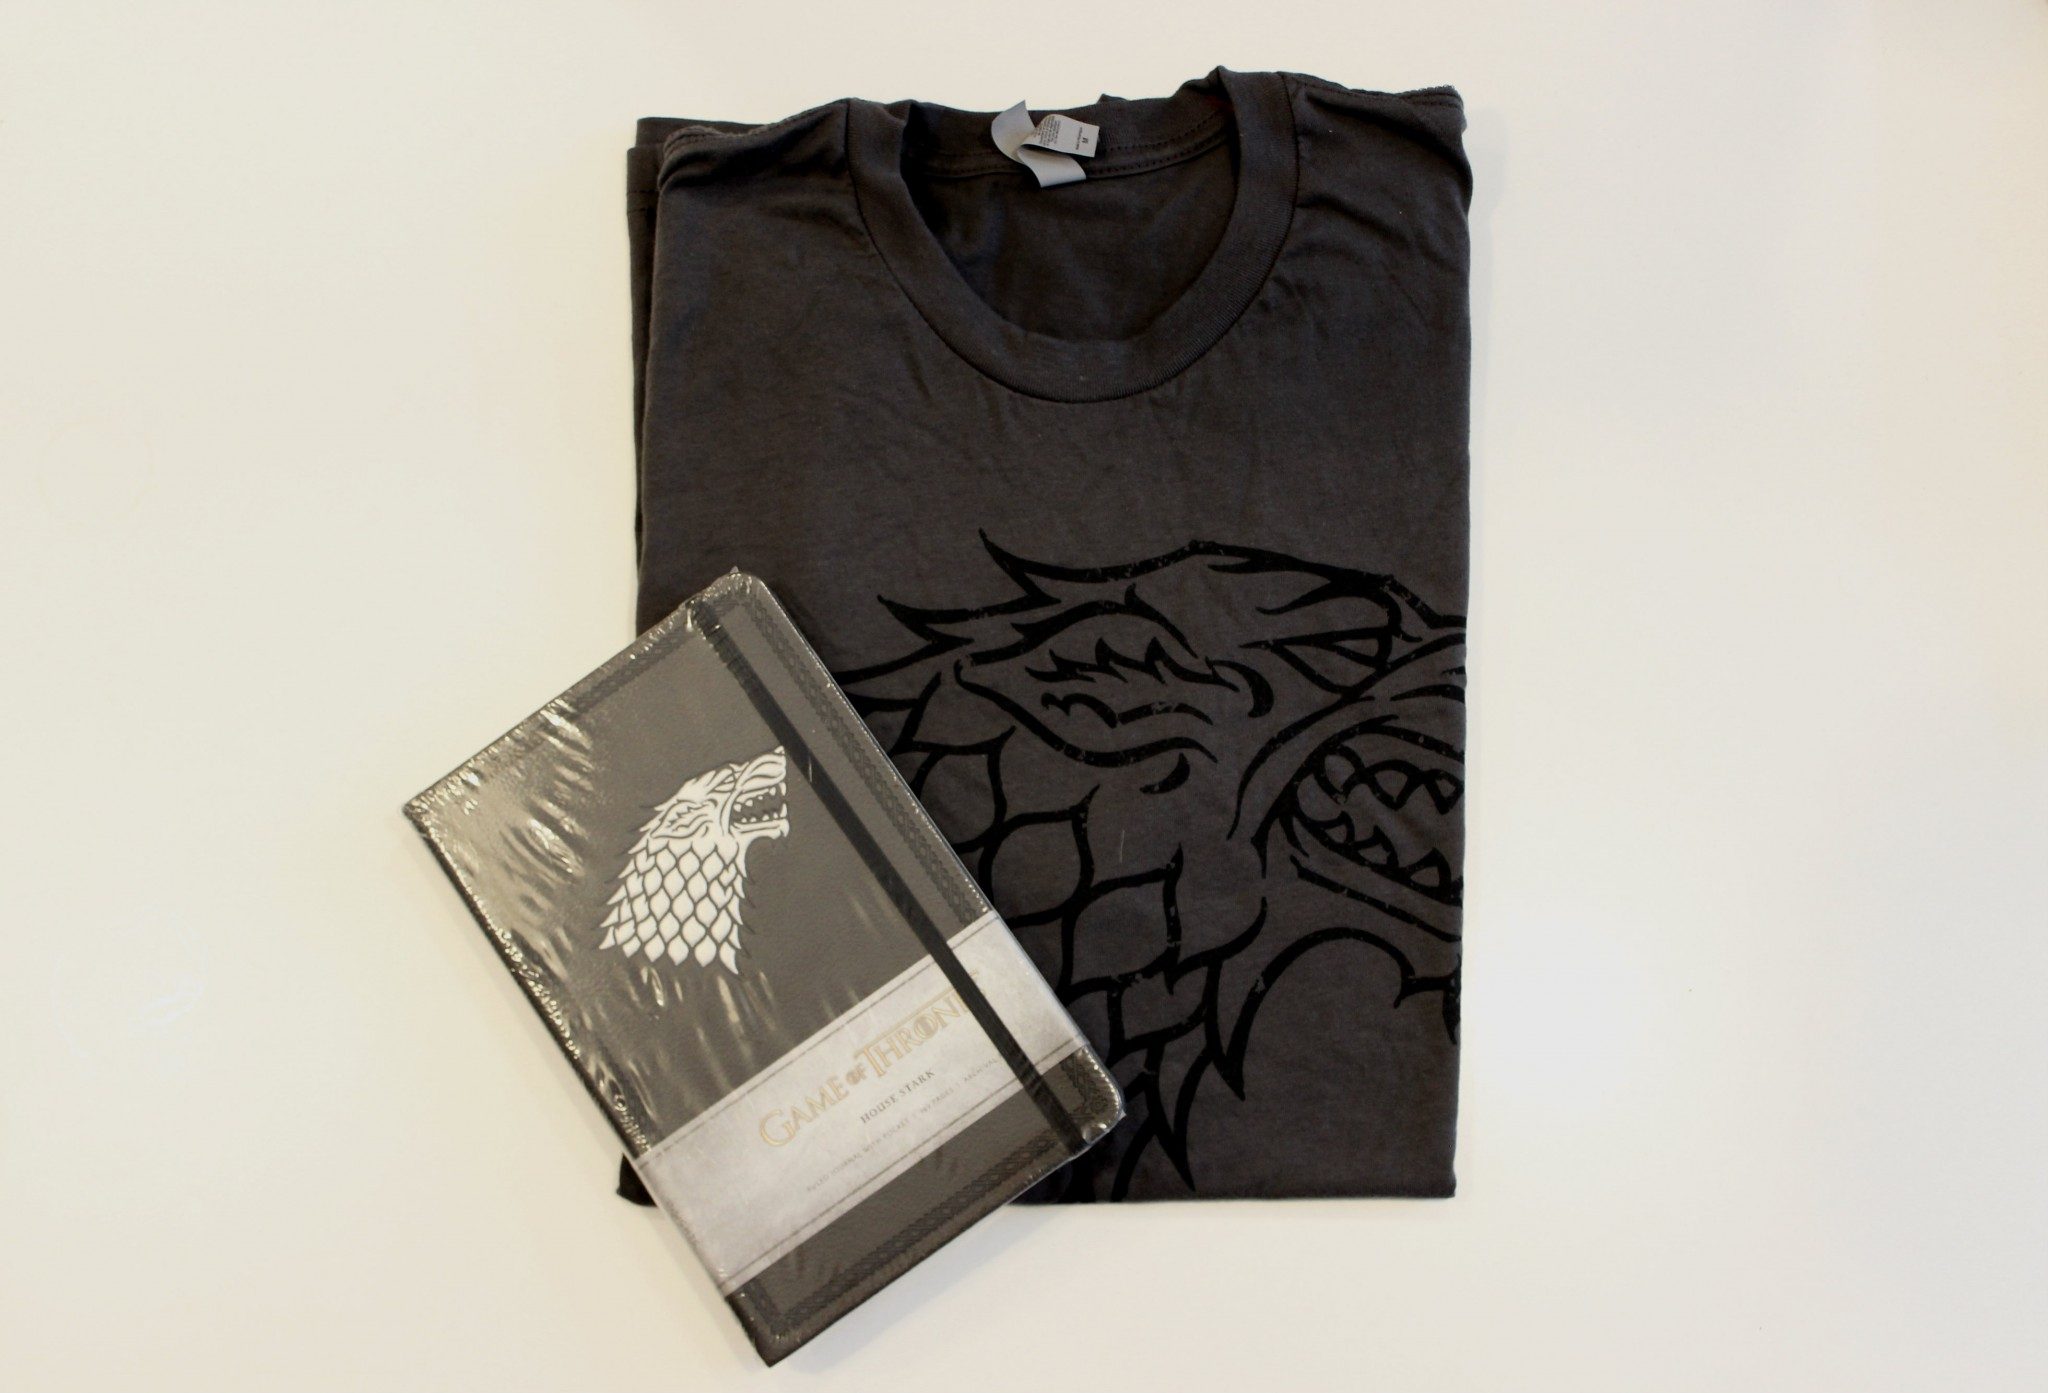 Game of Thrones goodies 4